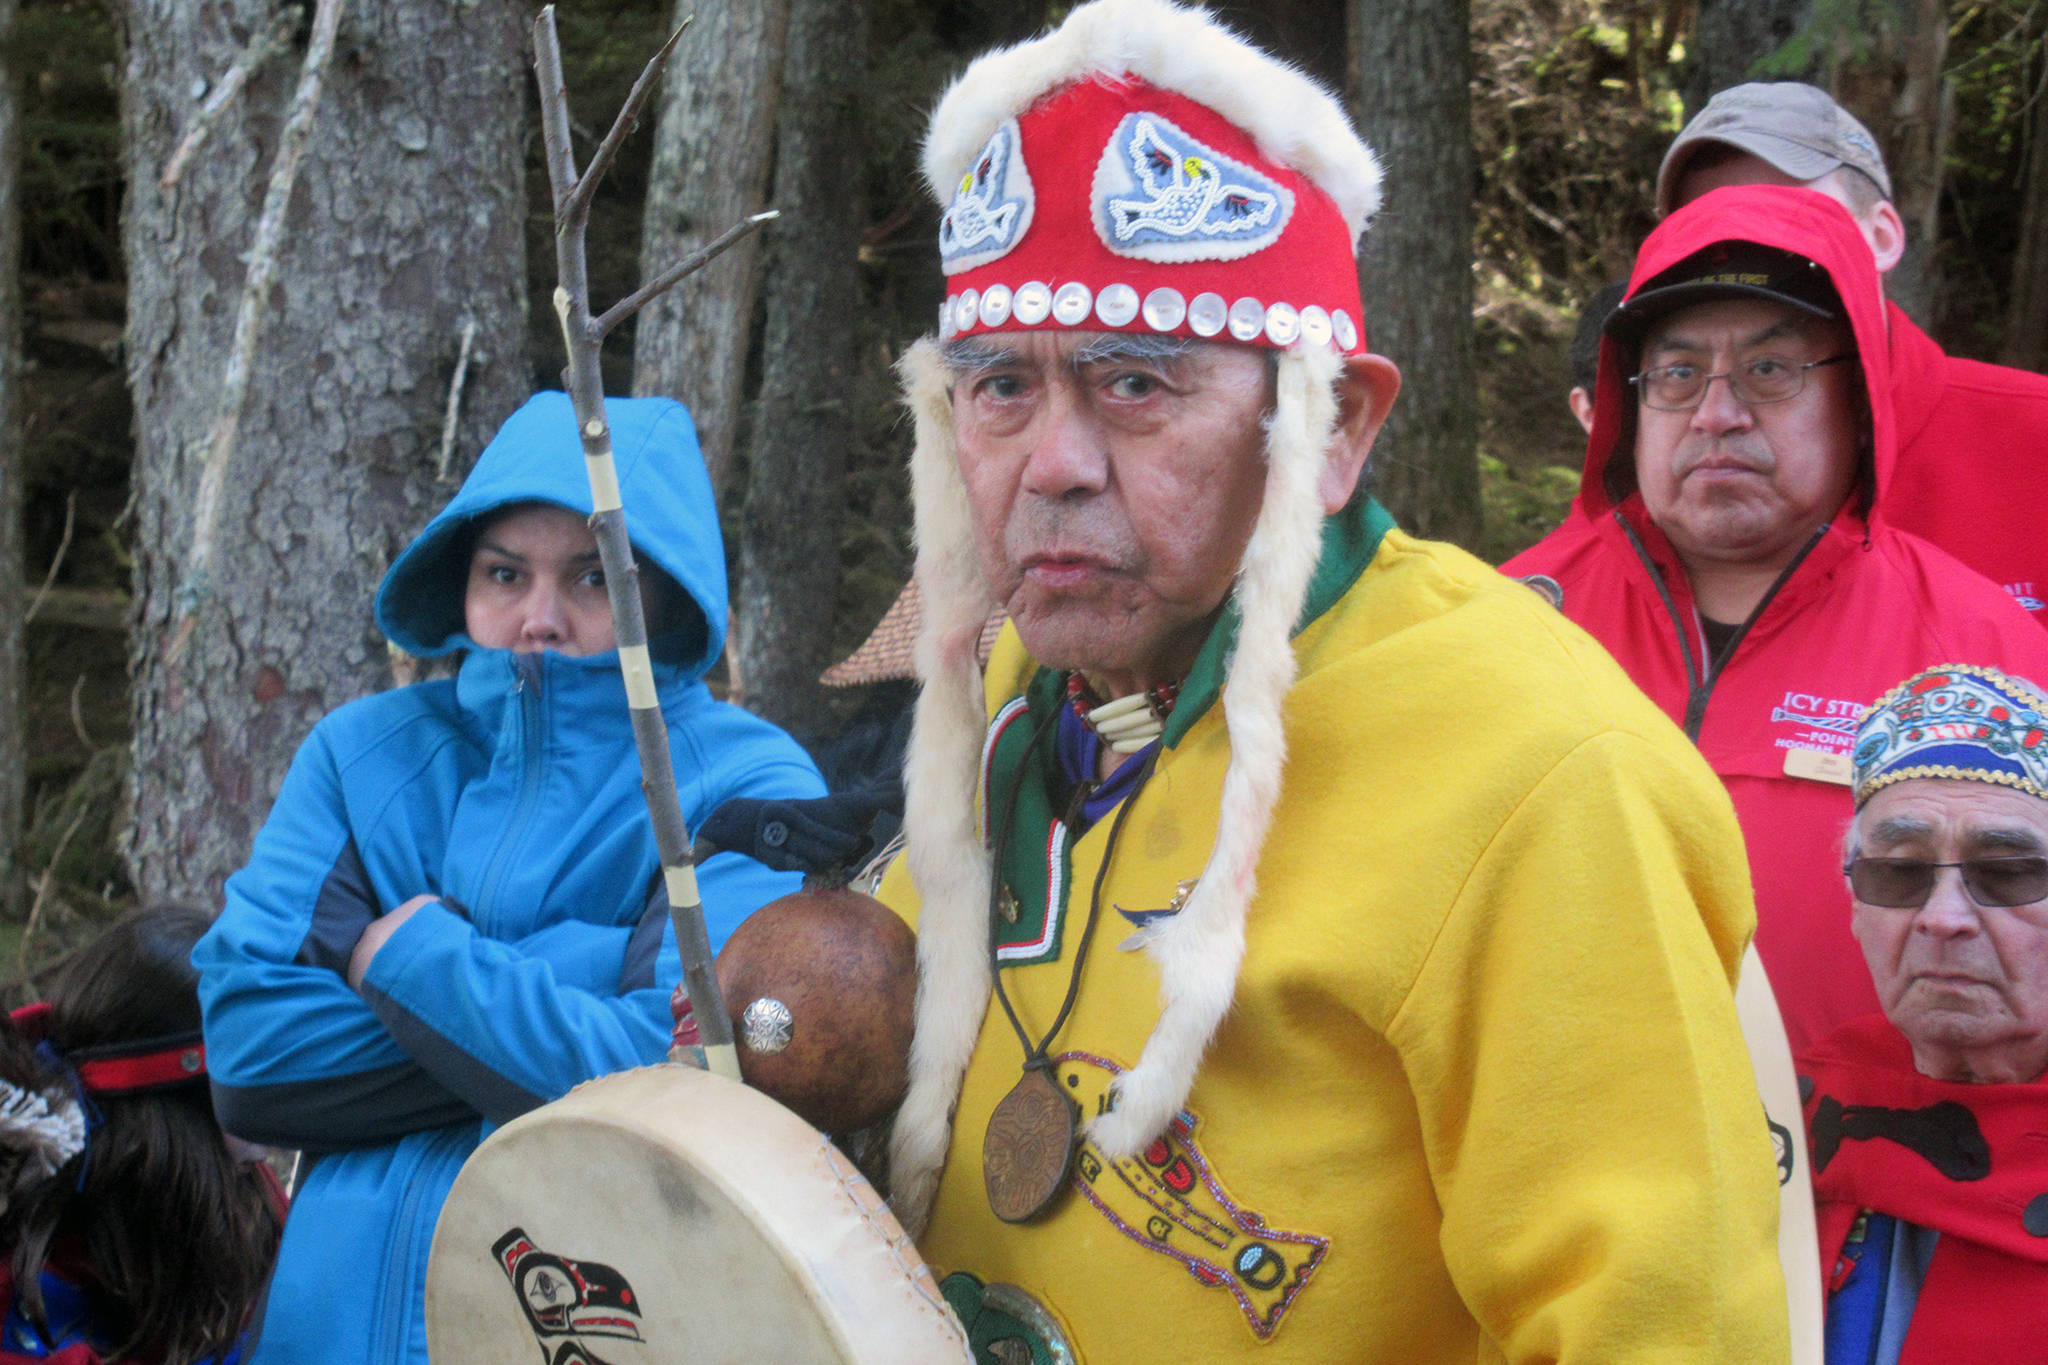 Opinion: Tlingit history and culture thrive as Hoonah expands cruise destination